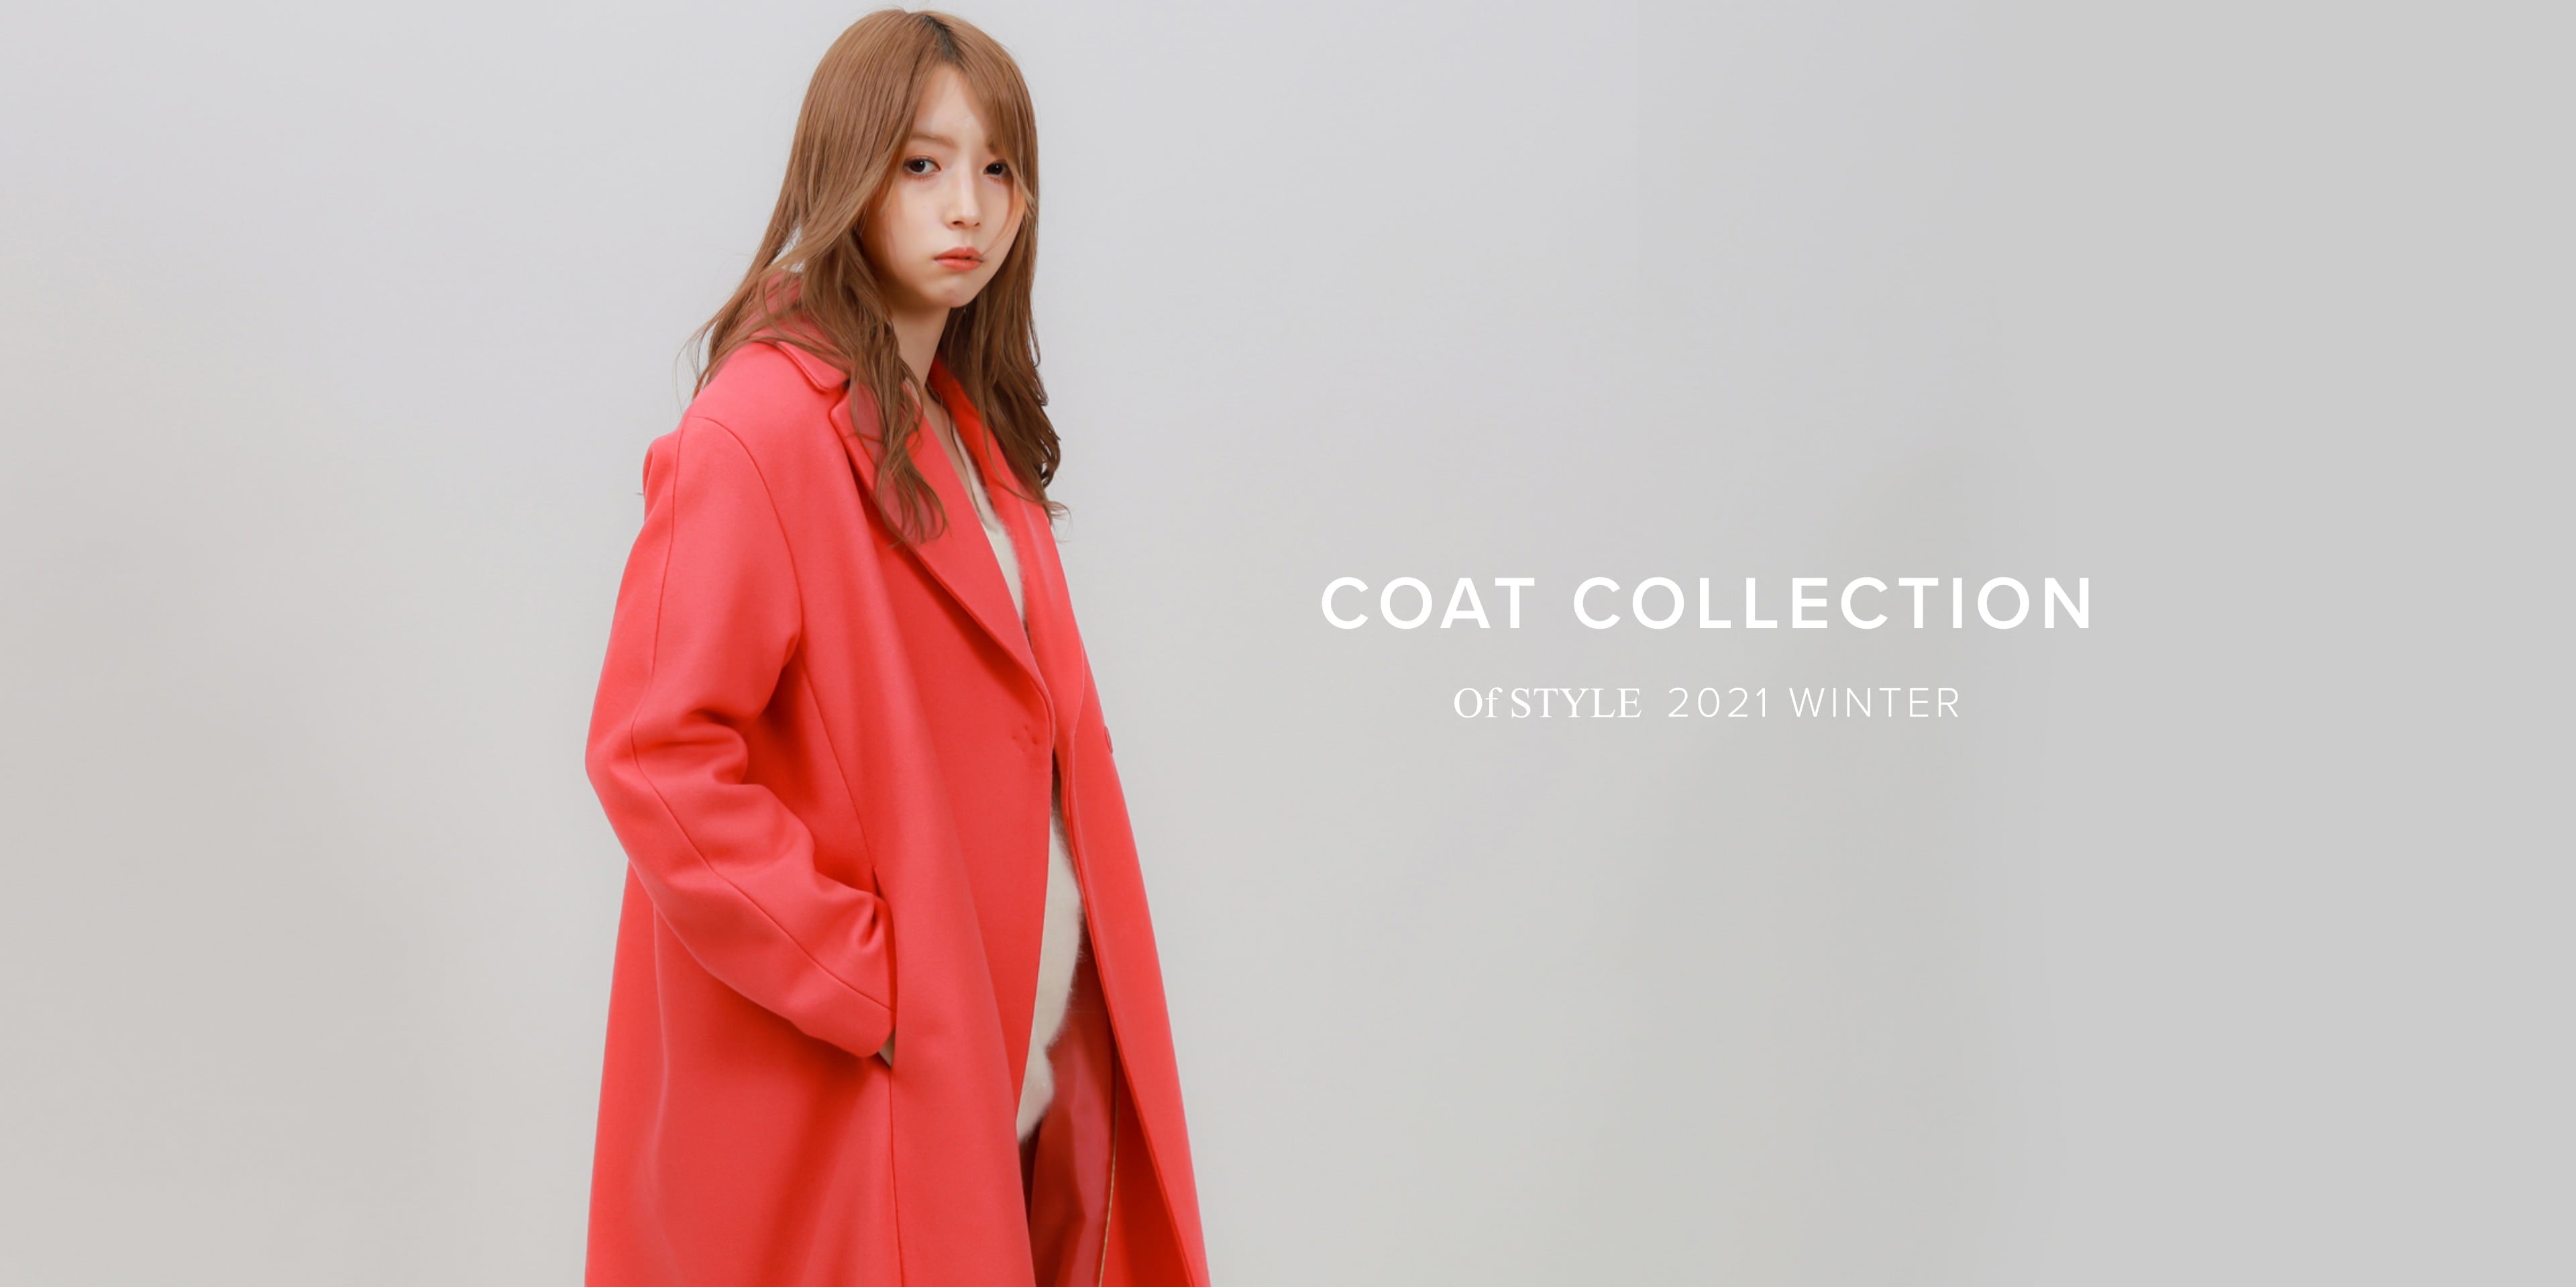 COAT COLLECTION 2021 WINTER